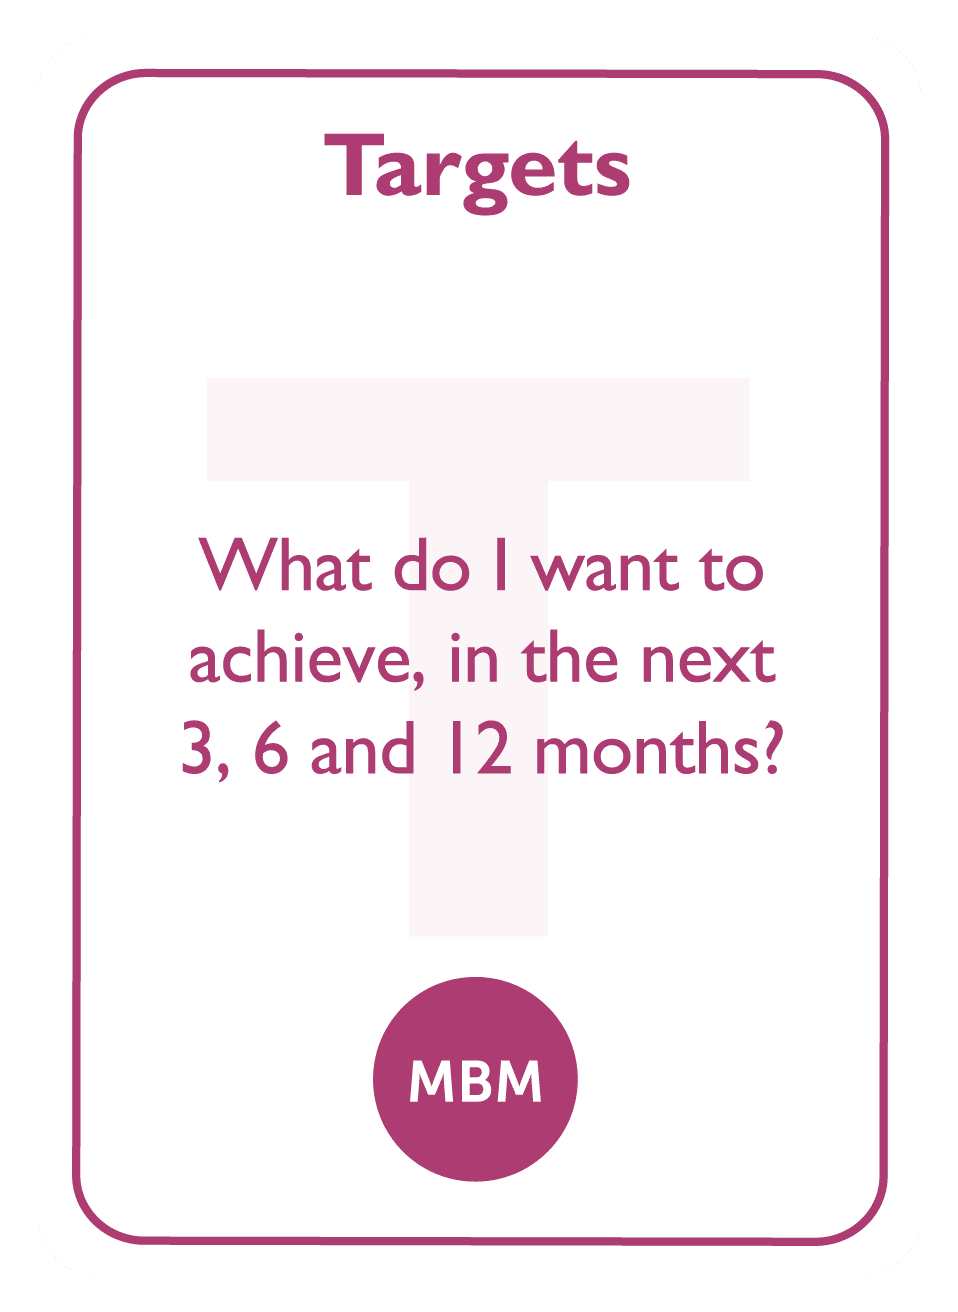 Negotiation coaching card titled Targets